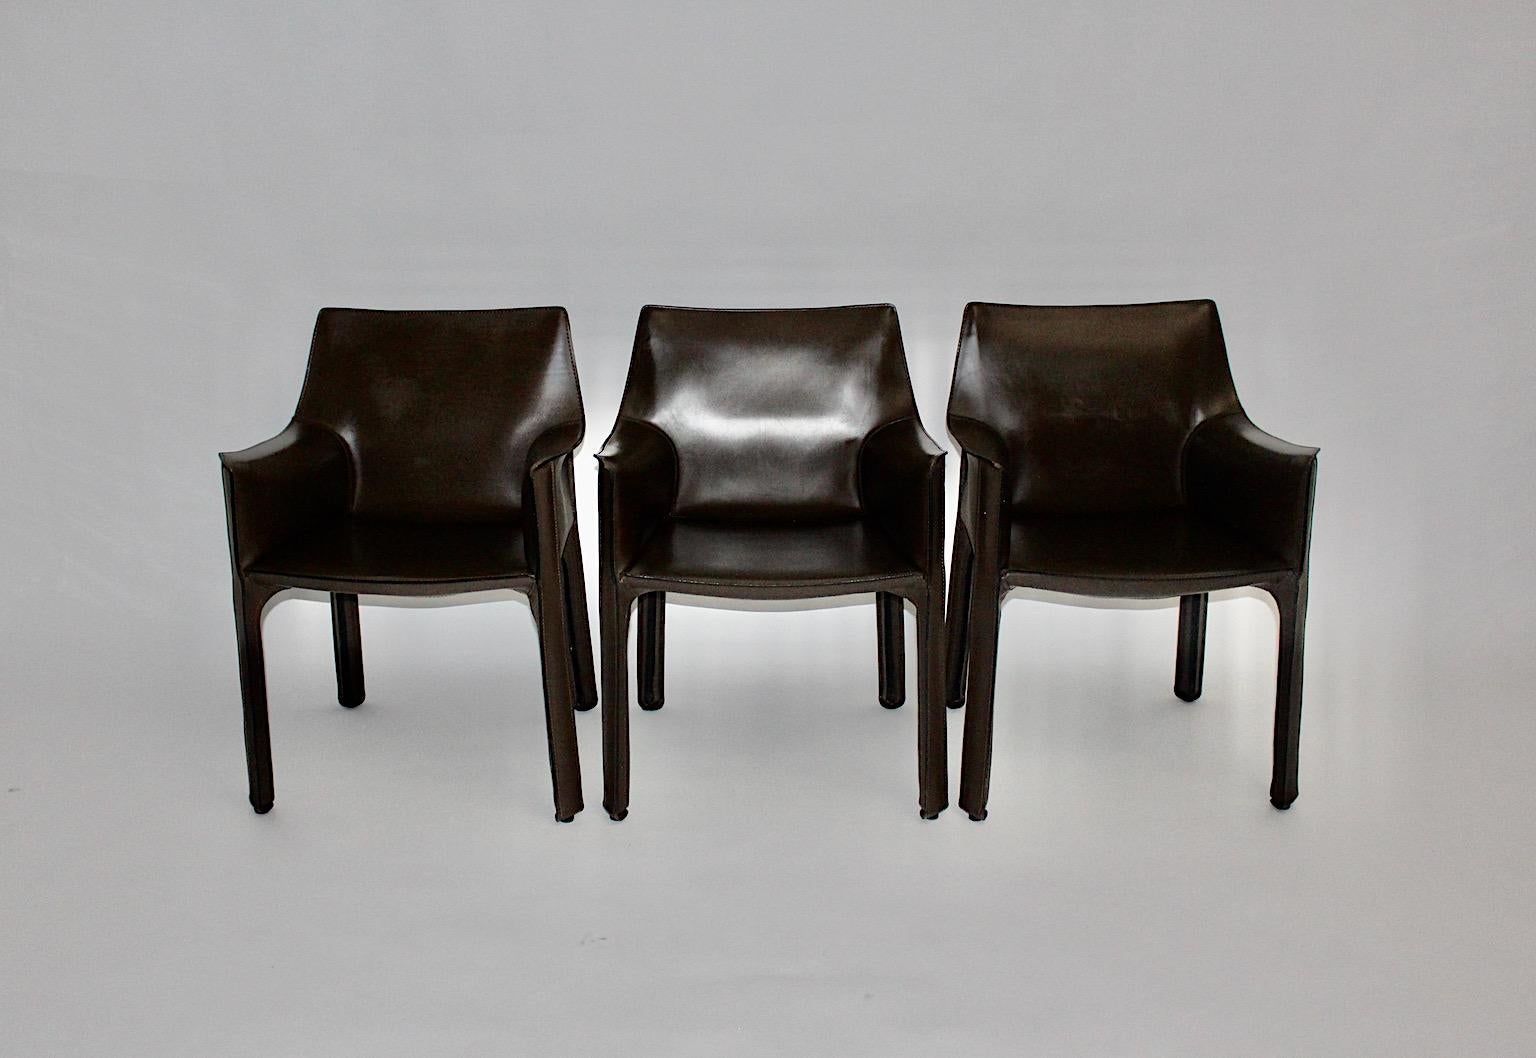 Mario Bellini vintage set of six dining chairs or armchairs Mod. Cab 413 from high quality leather in chocolate brown color Italy 1970s. Executed by Cassina, 1990s, Italy.
While the stabile moulded metal frame was covered with beautiful stitched